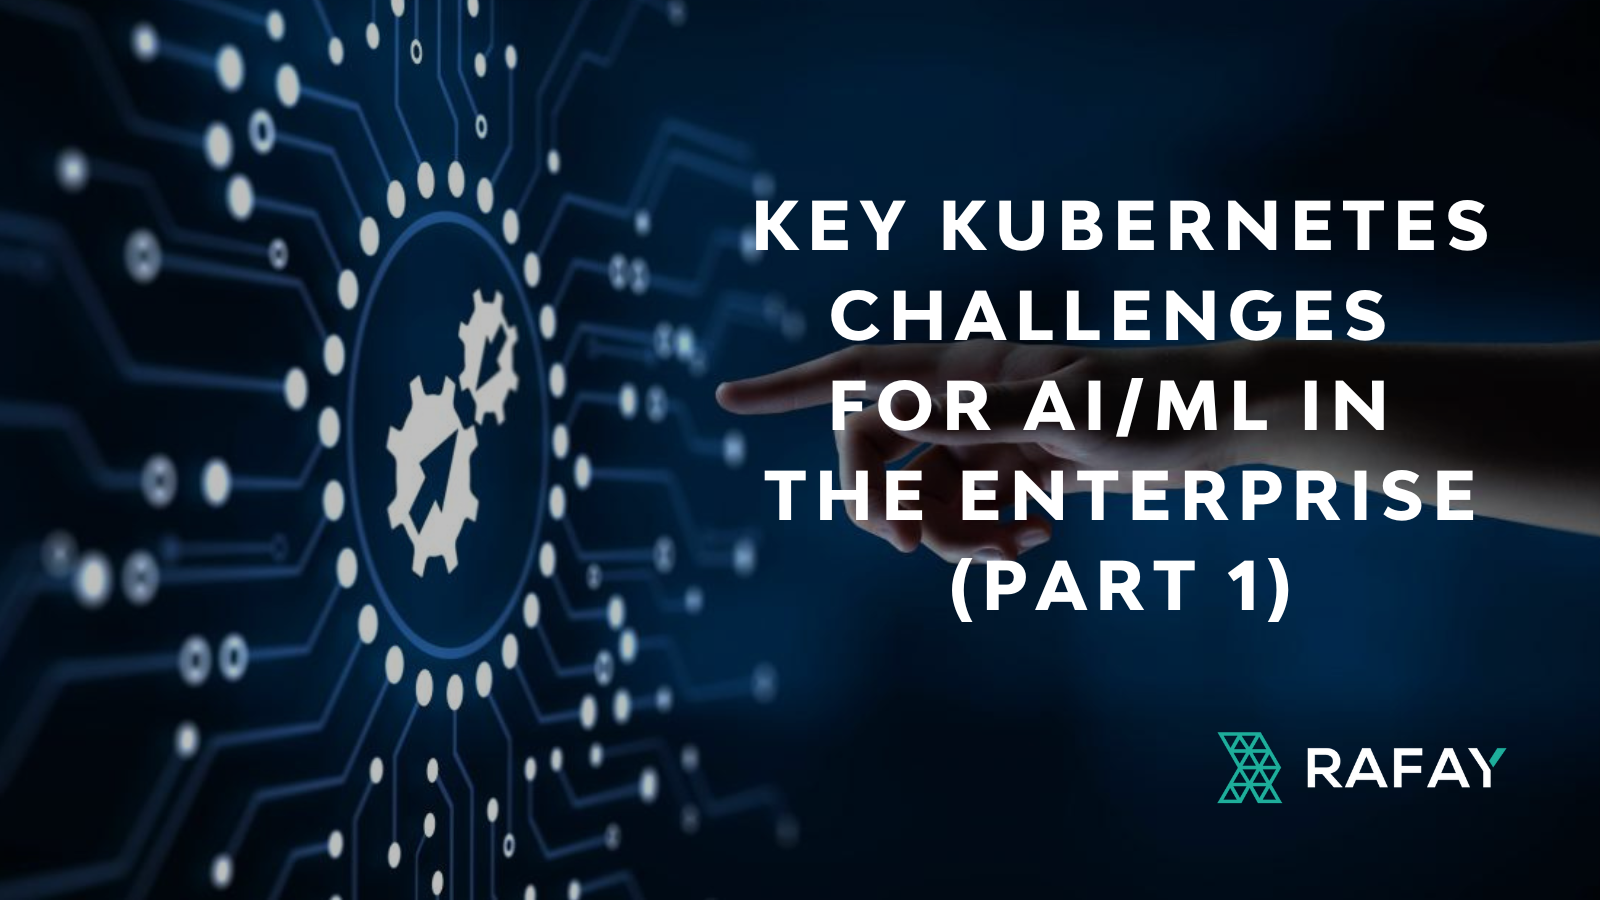 image for Key Kubernetes Challenges for AI/ML in the Enterprise